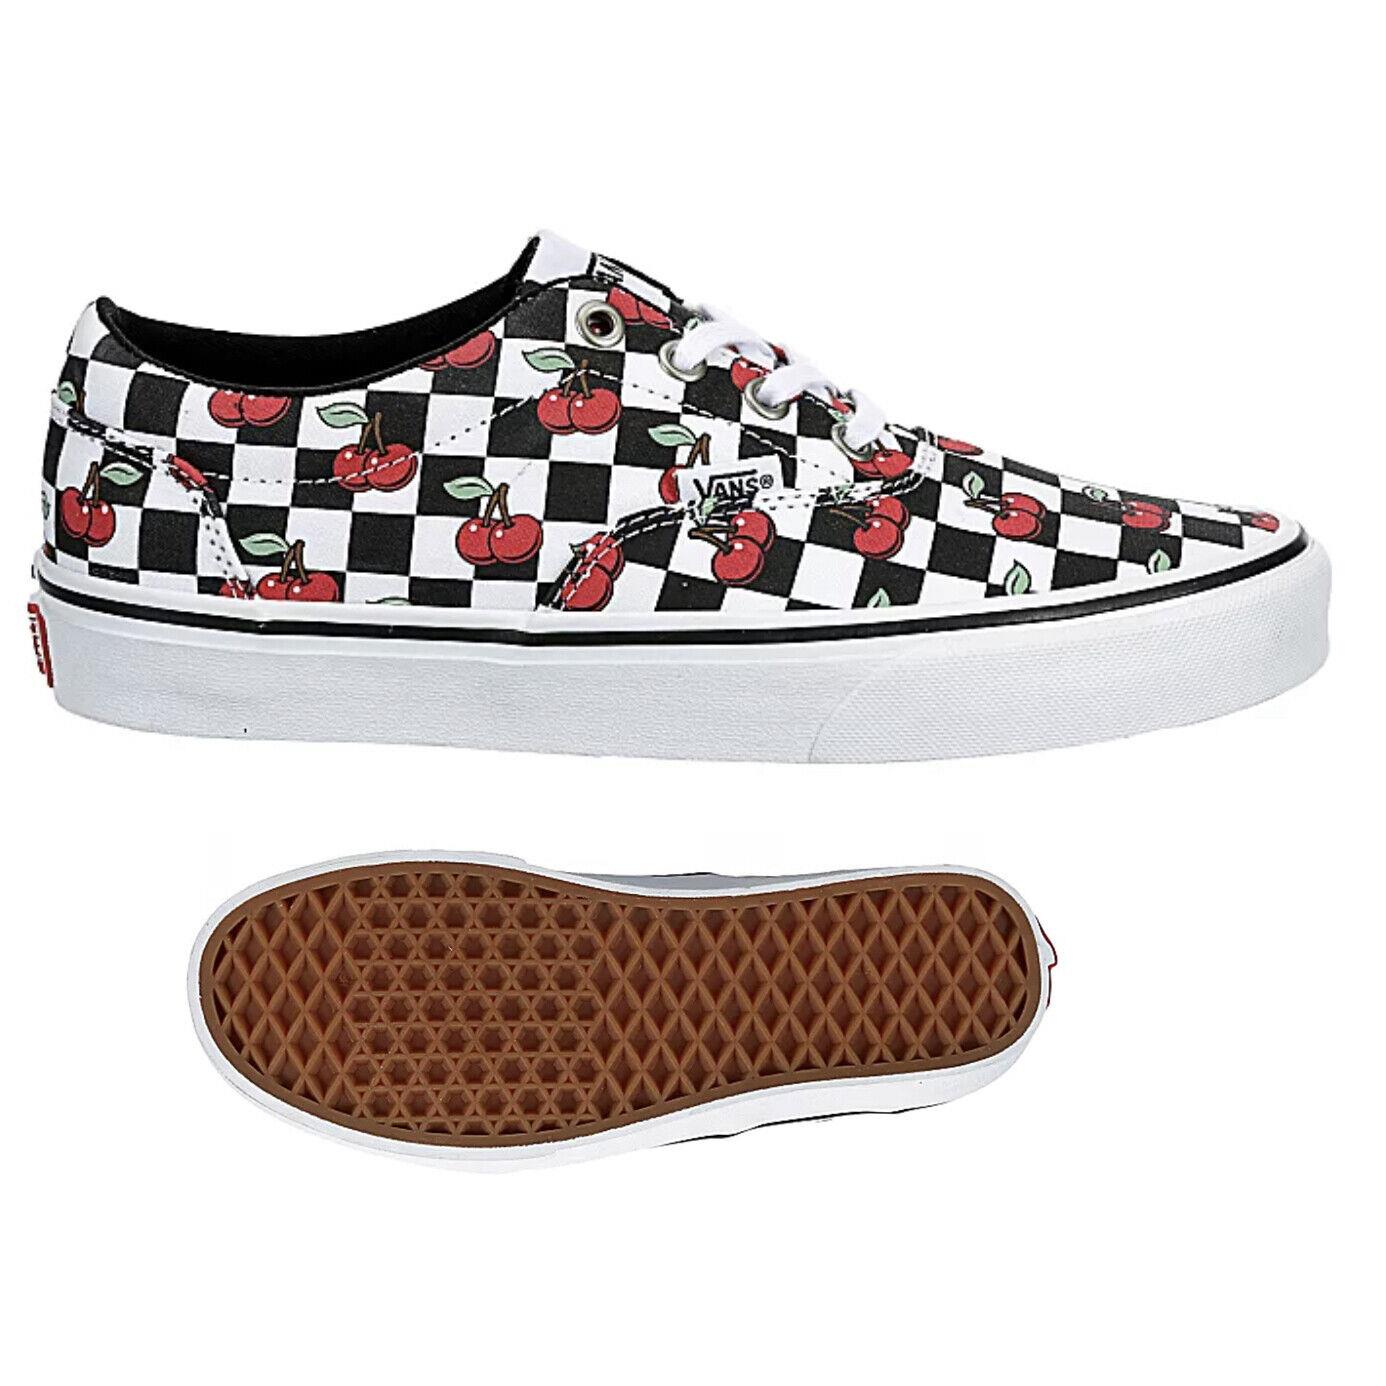 Vans Cherry Checkered Lace Up Casual Women`s Sneakers Shoes All Sizes